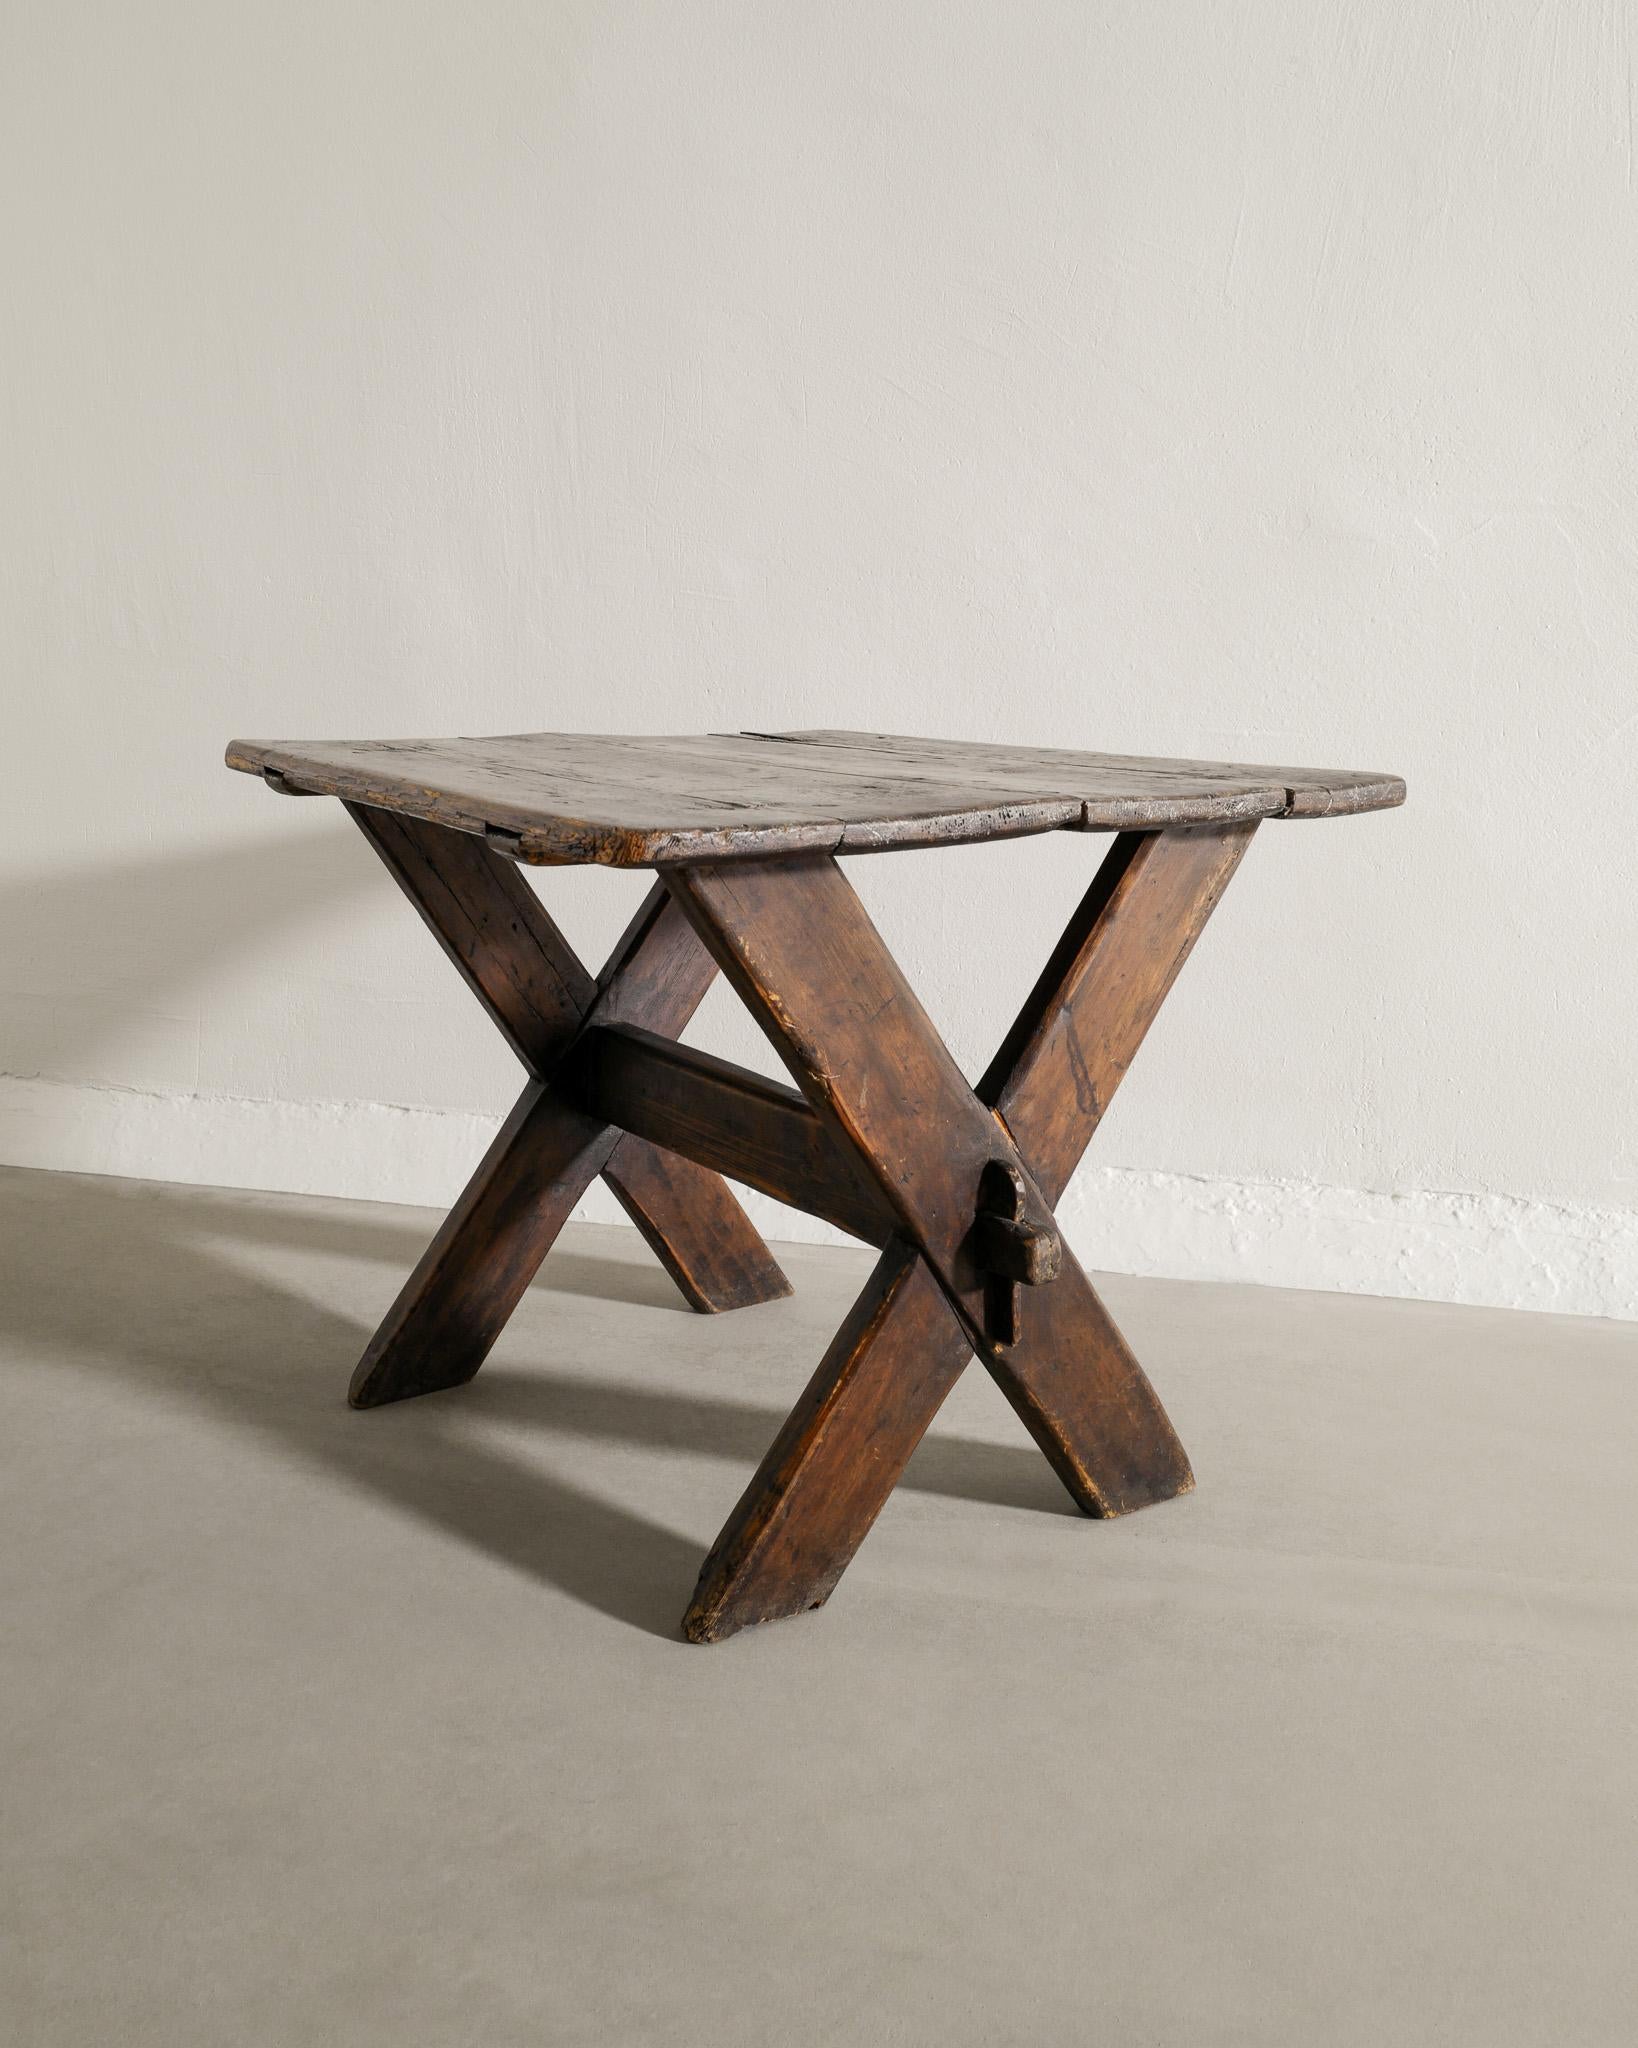 Rare and beautiful antique wabi sabi wooden pine table with crossed legs produced in Sweden late 1800s. Perfect as a smaller coffee sofa table or side. In good original condition. 

Dimensions: H: 45 cm / 17.70